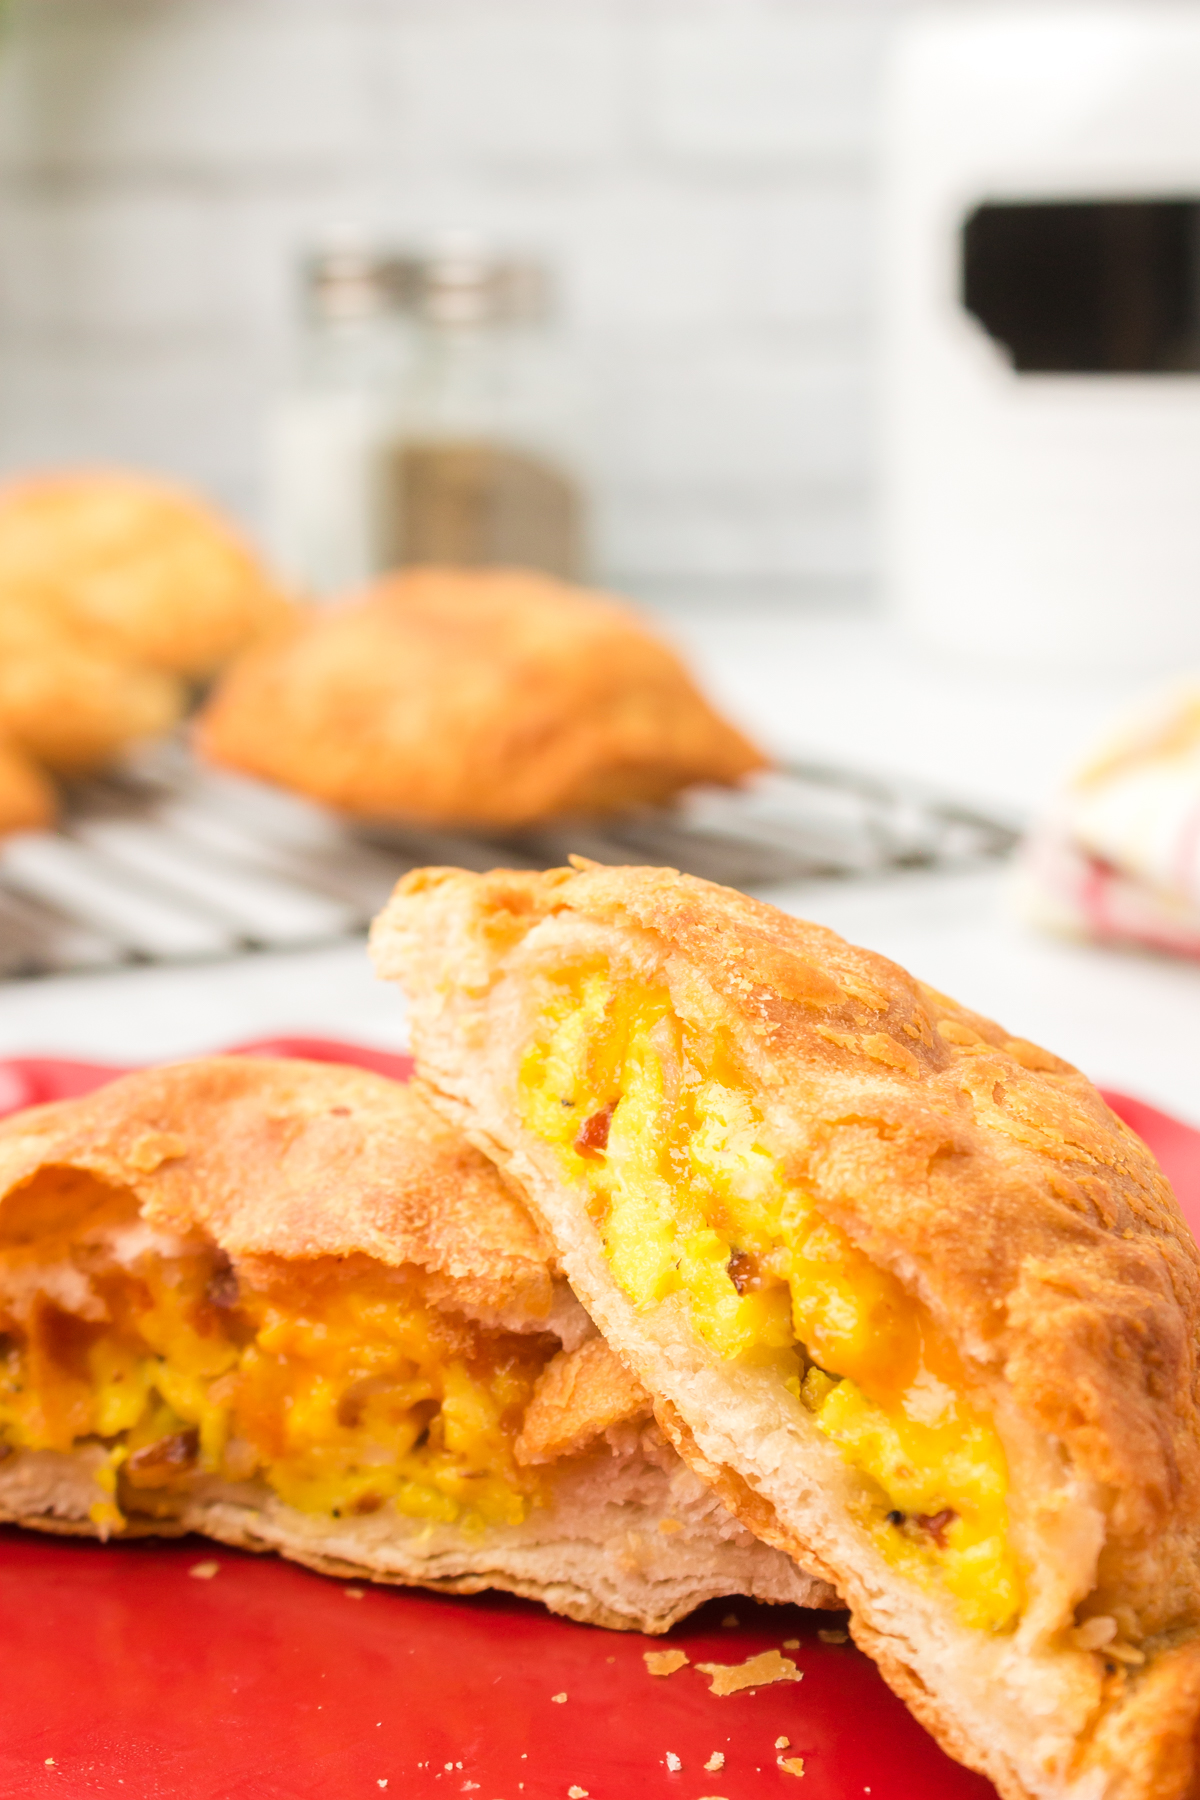 Bacon Egg and Cheese Biscuits (Stuffed Biscuits)